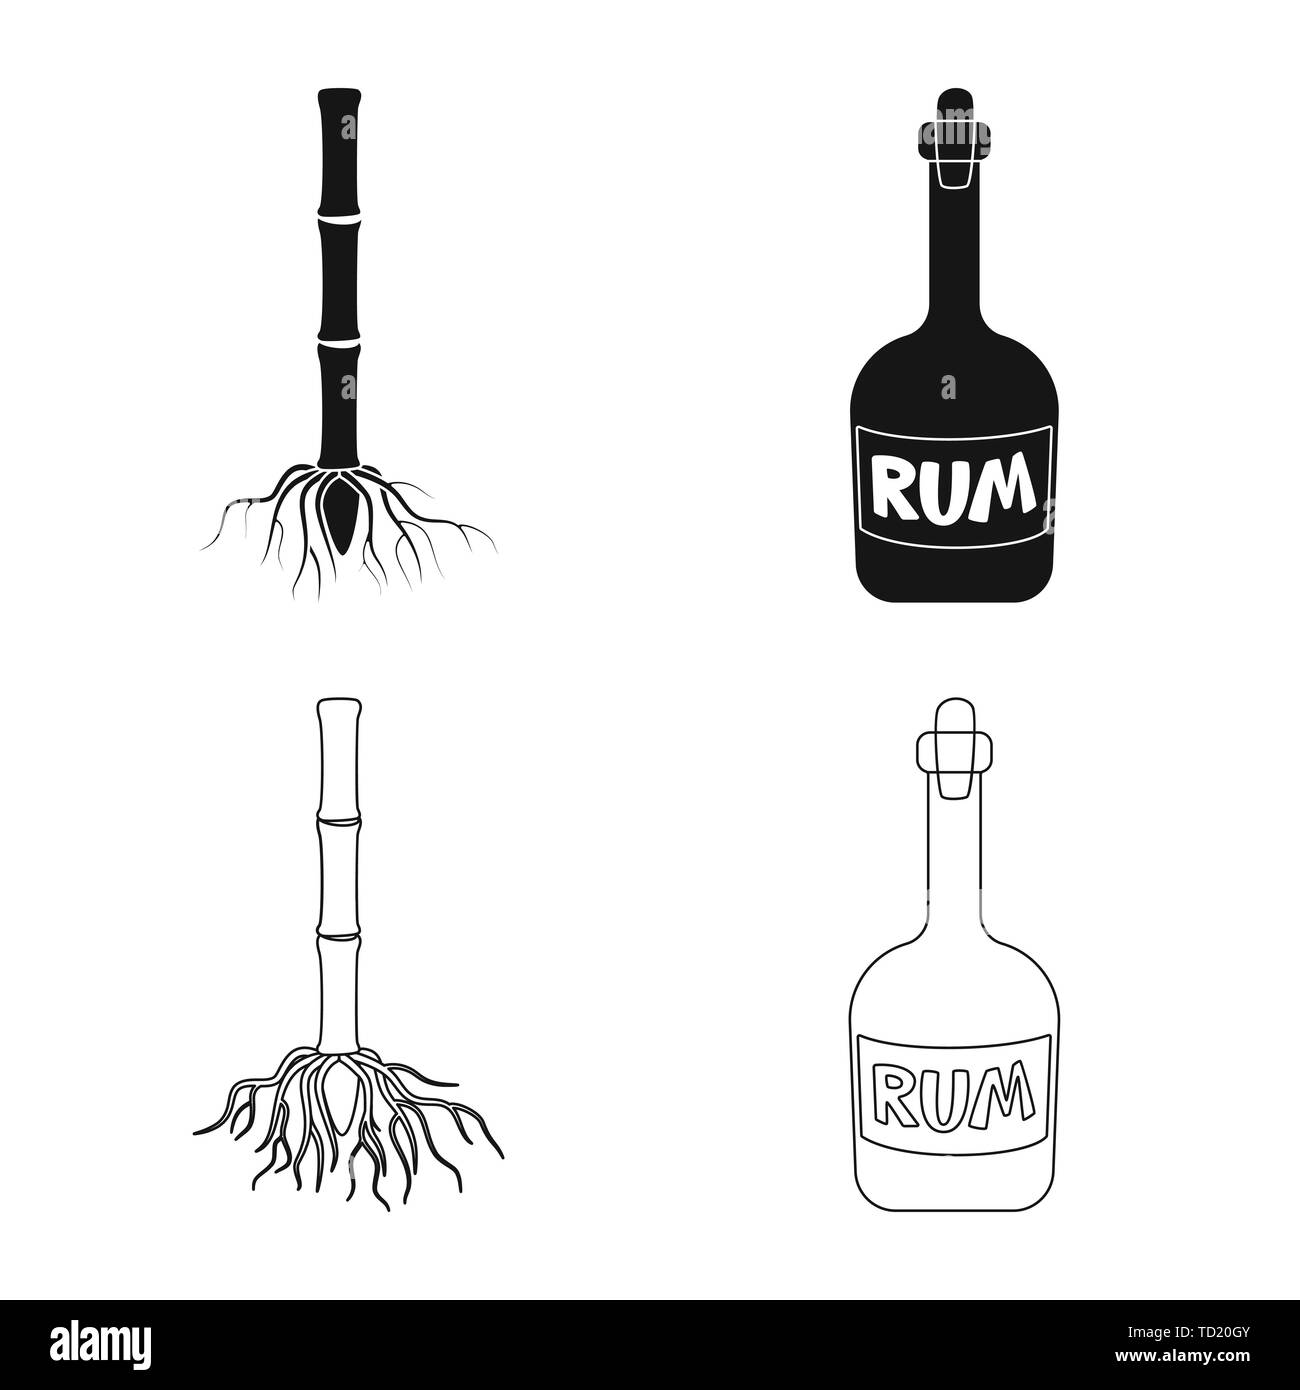 root,rum,system,bottle,stem,alcohol,sprout,glass,underground,bung,eco,pirate,process,drink,development,vintag,basis,capacity,organic,bar,farm,agriculture,sucrose,technology,sugarcane,cane,sugar,field,plant,plantation,set,vector,icon,illustration,isolated,collection,design,element,graphic,sign, Vector Vectors , Stock Vector